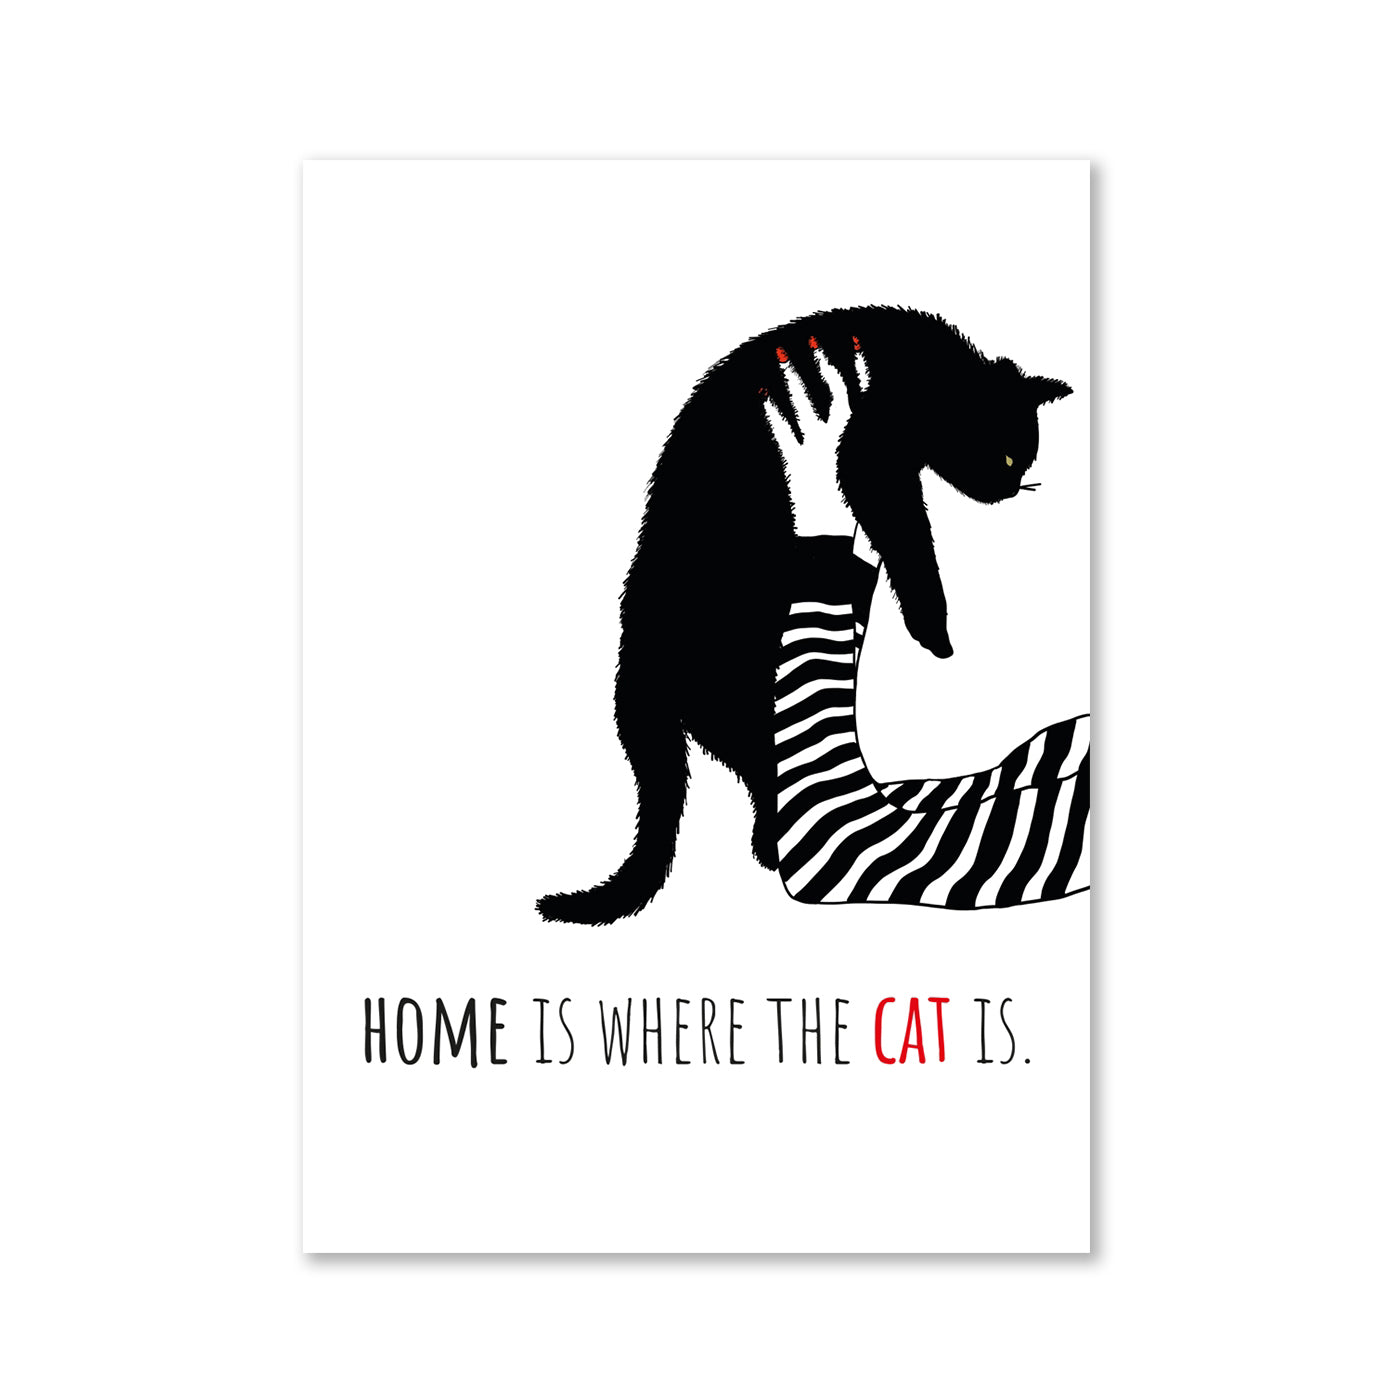 Home is, where the cat is - Magnet